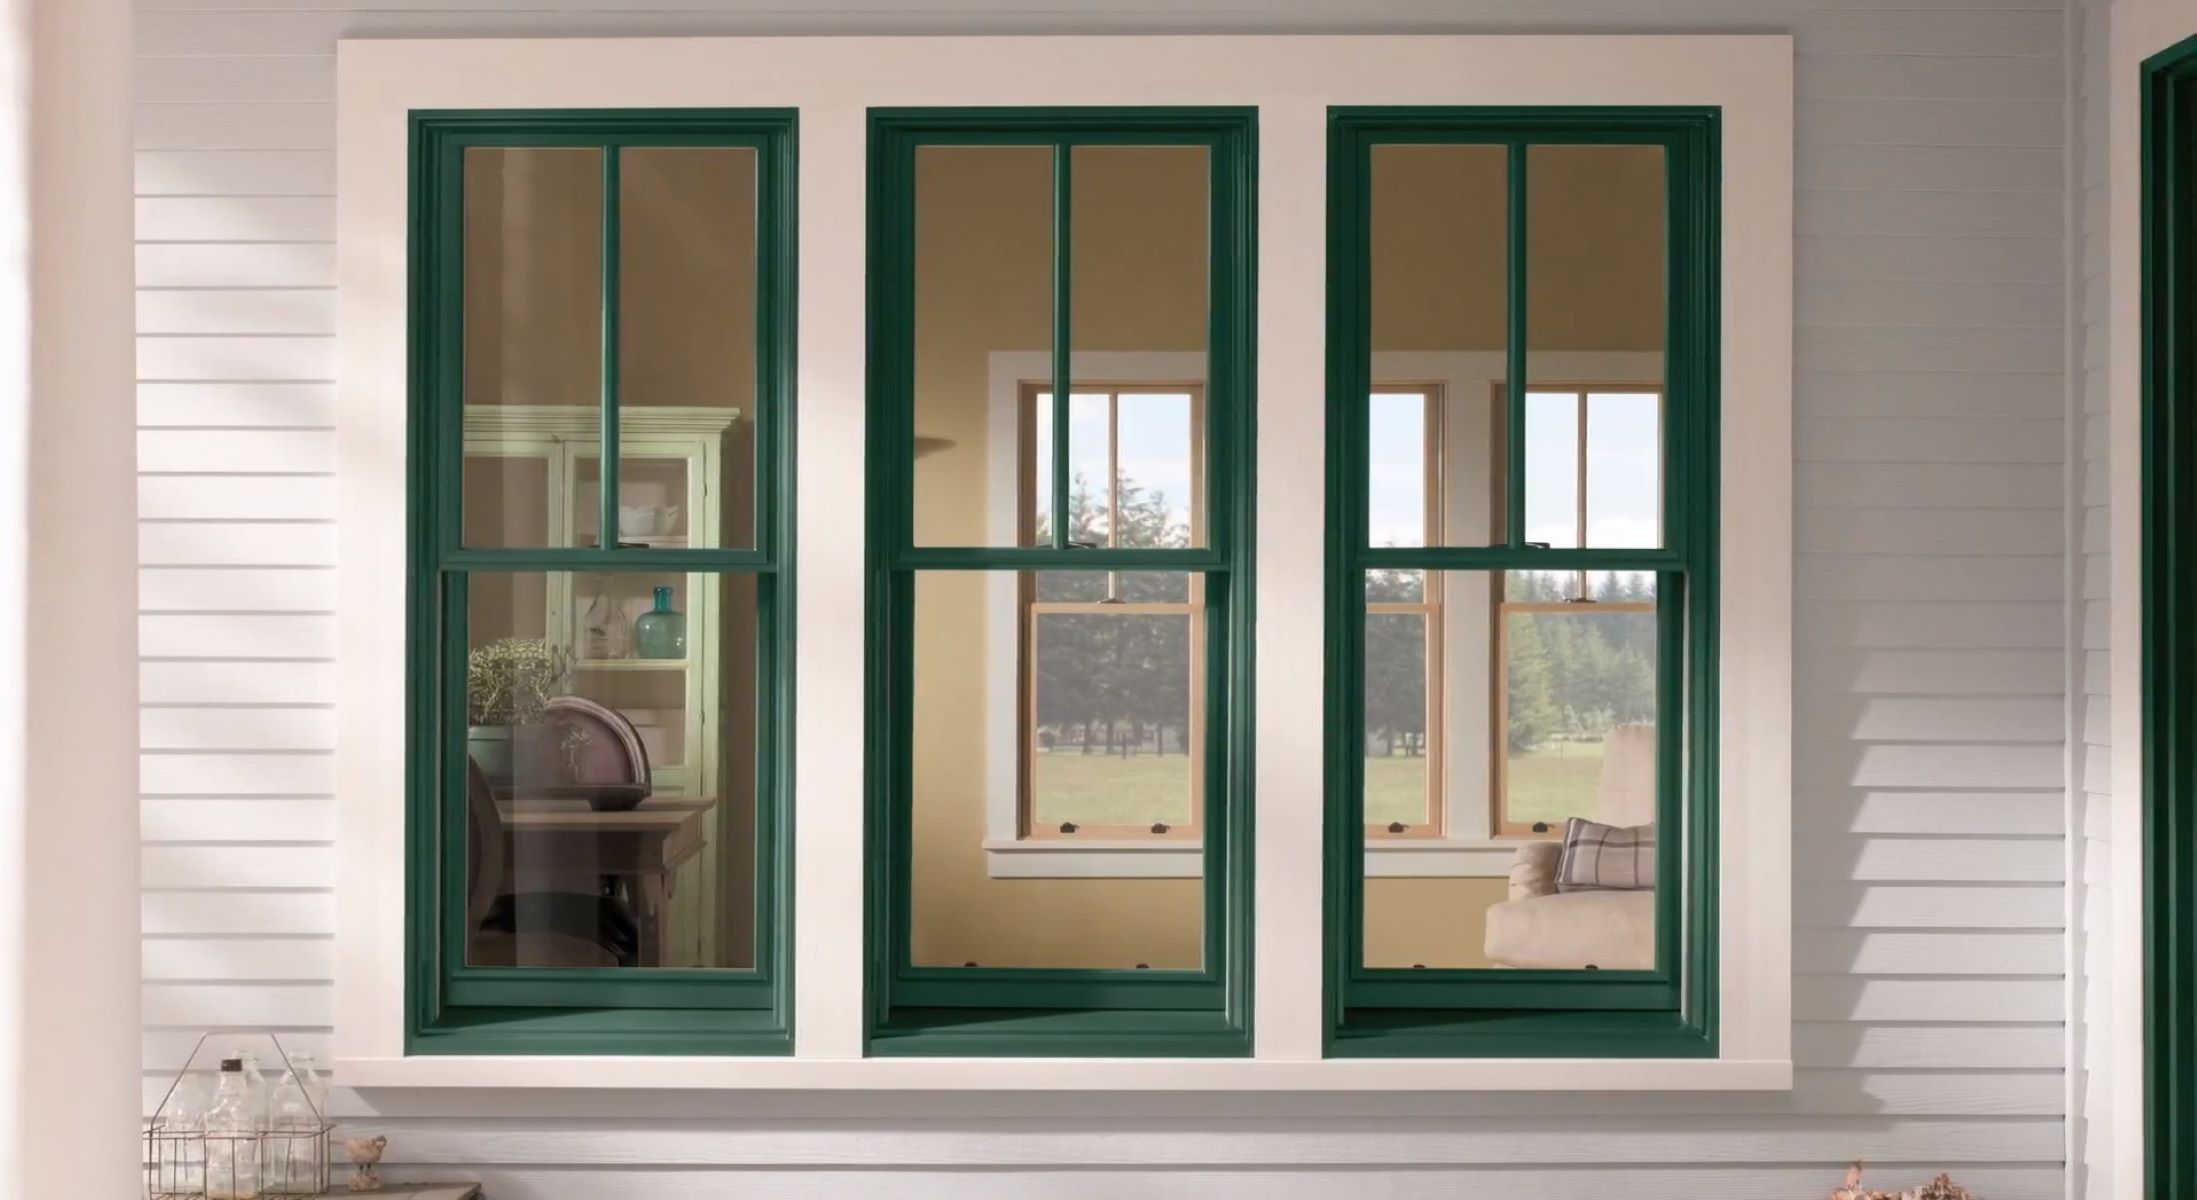 How To Replace Window Glass In Vinyl Frame